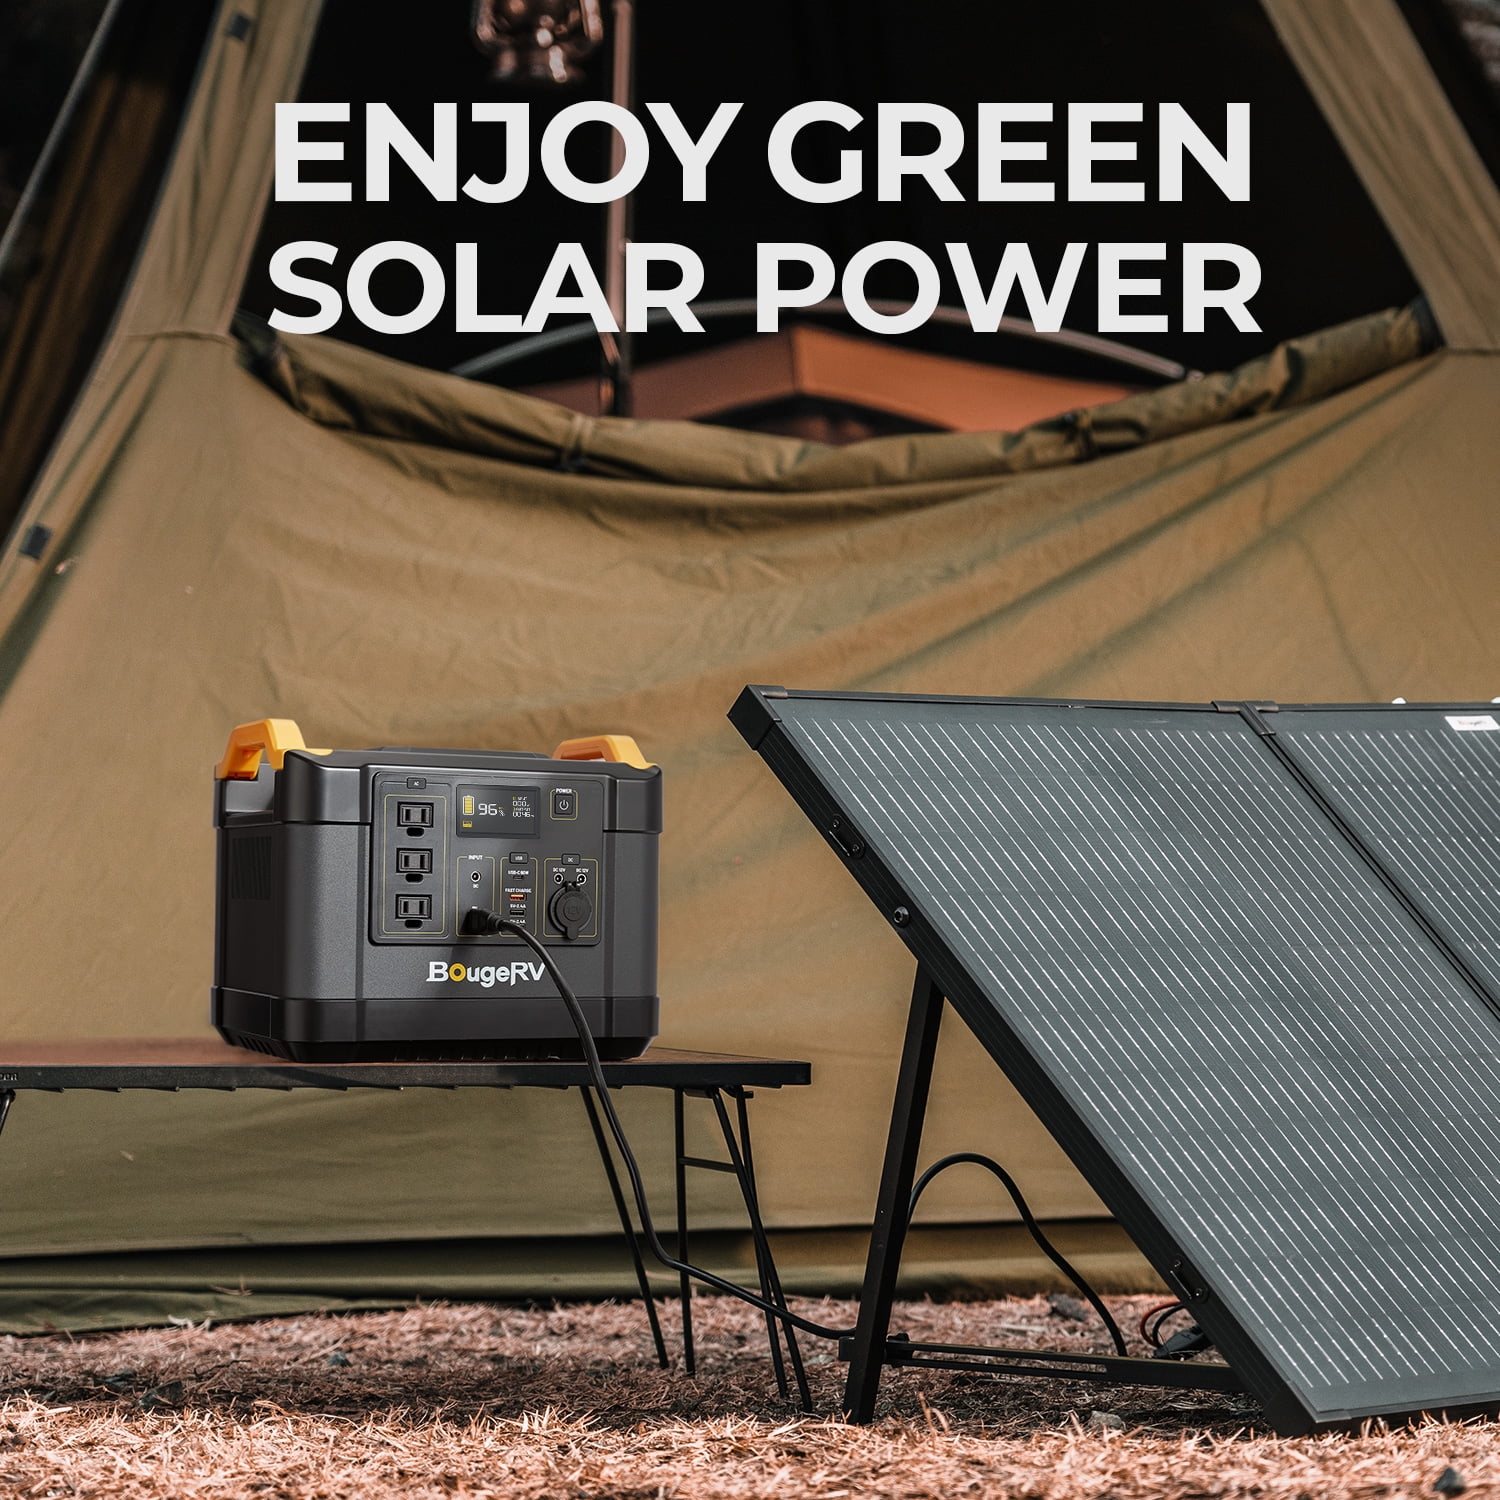 BougeRV Portable Power Station Fort 1000, 1120Wh Solar Generator, LiFePO4  Battery Power Supply 3500 Cycles, 1200W AC Outlet for Outdoor, Camping,  Home Backup, Emergency 